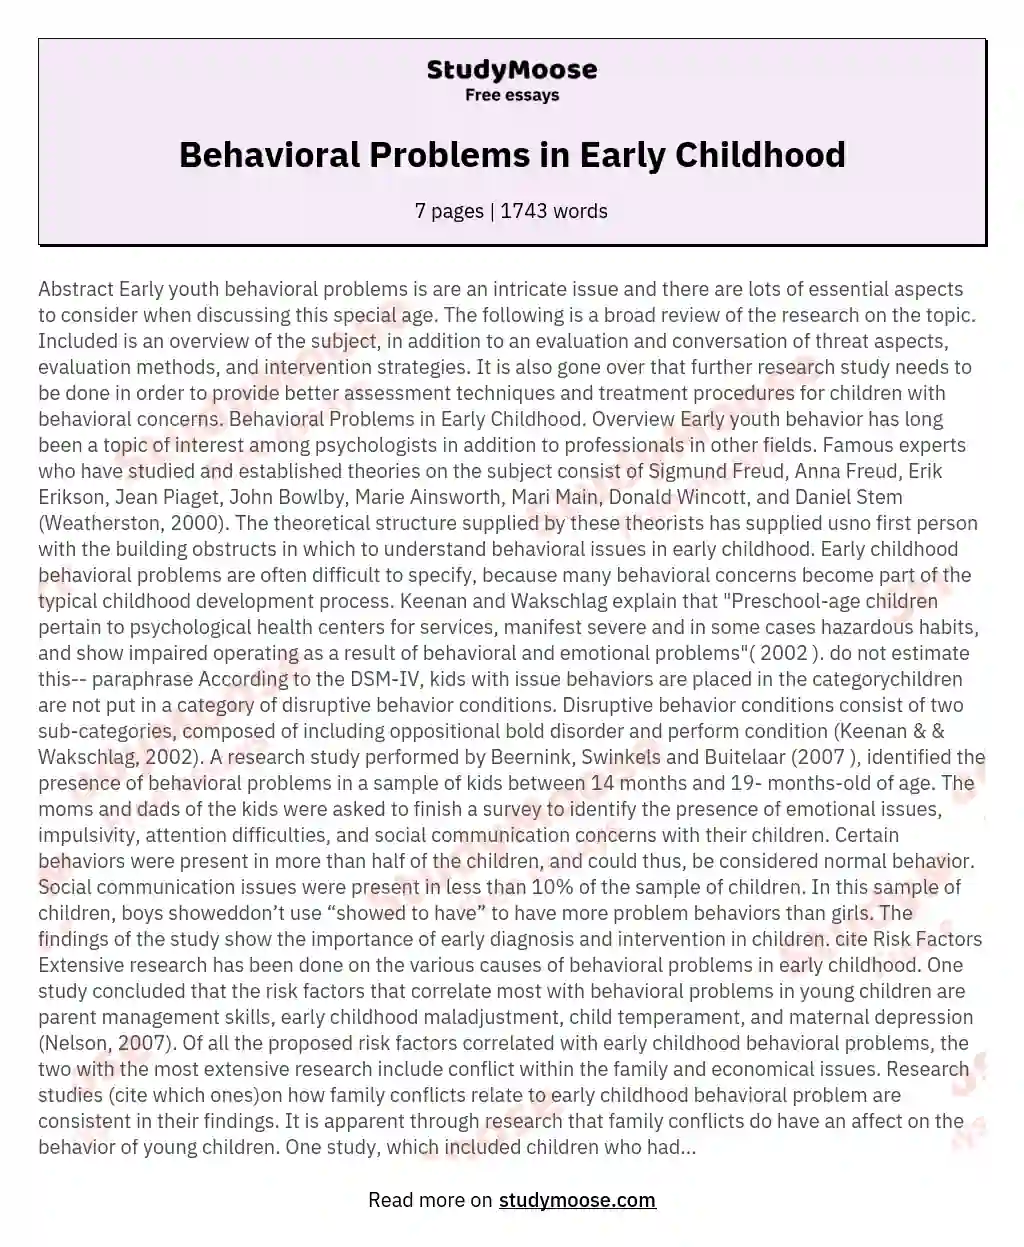 Behavioral Problems in Early Childhood essay